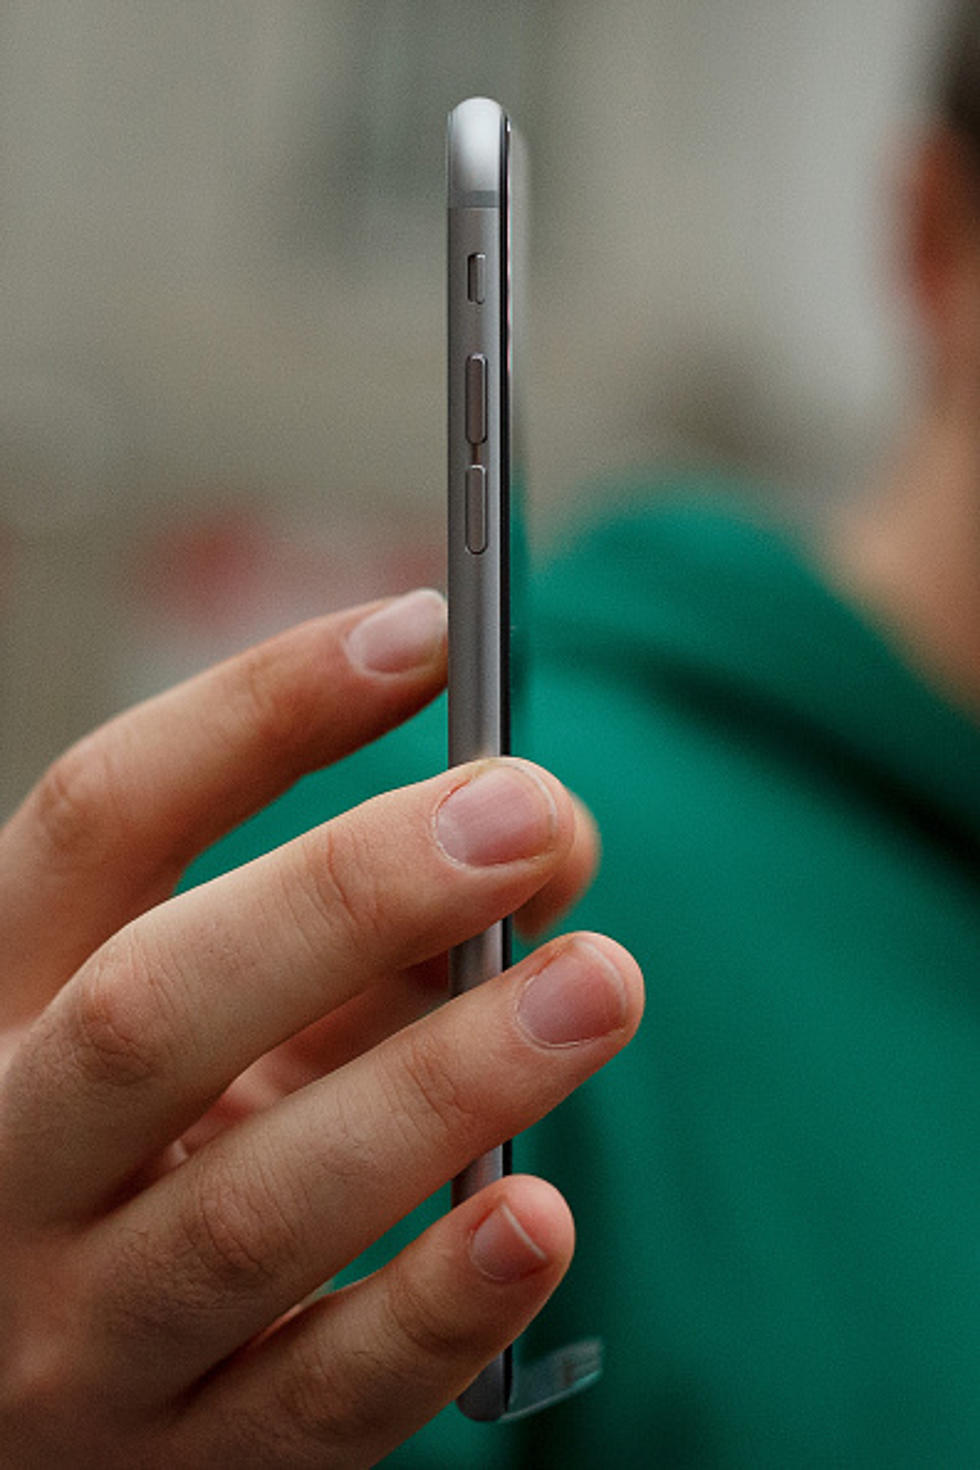 iPhone 6 Is Reported Pulling Out Hair (Really?)